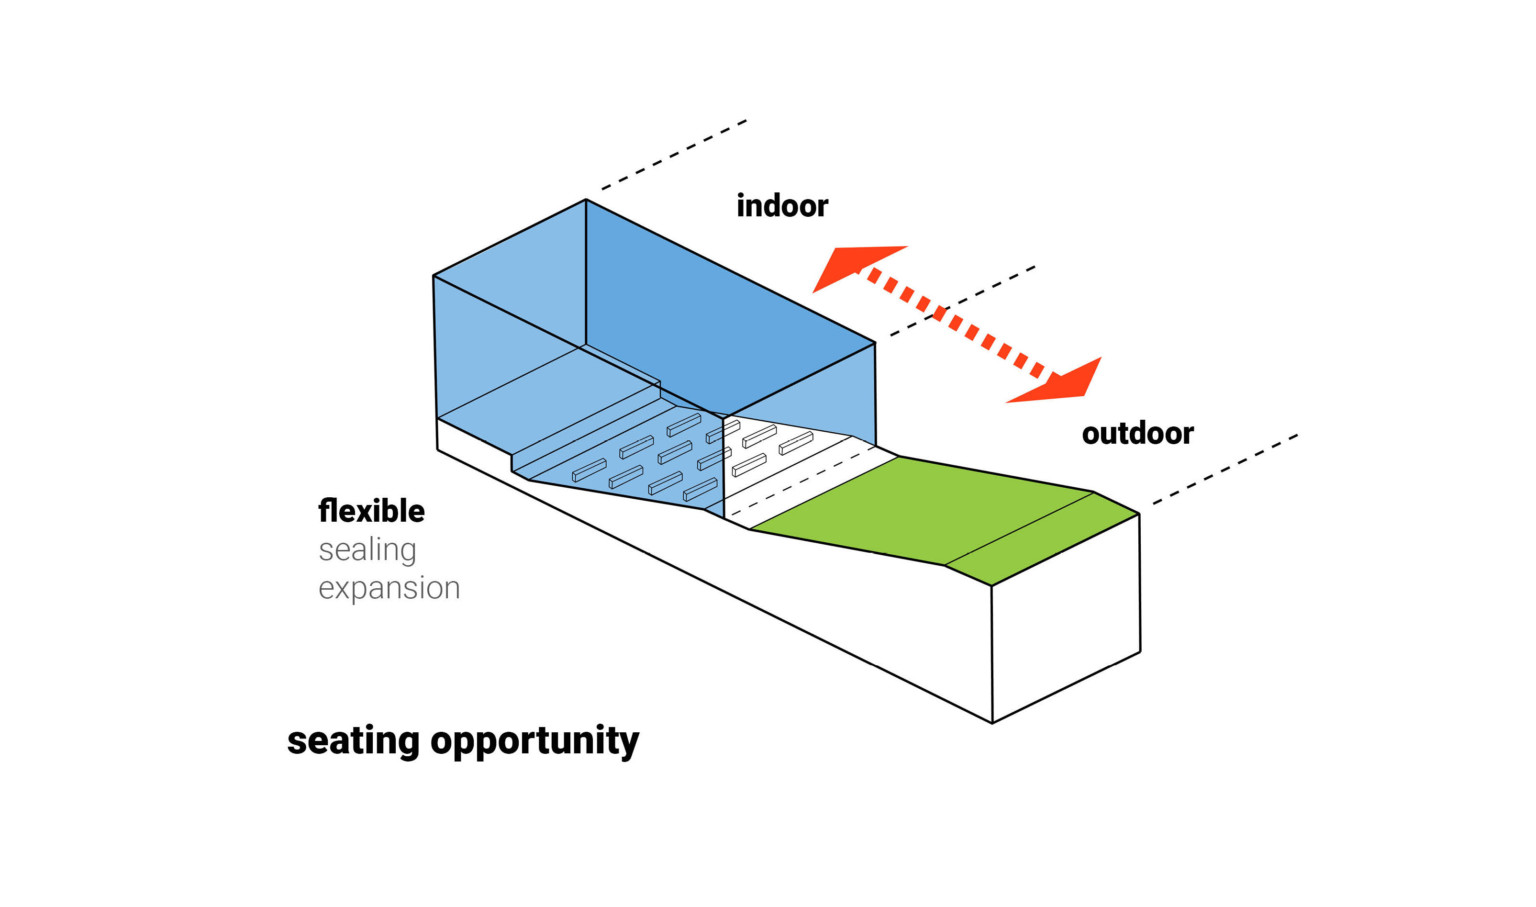 Diagram showing the potential seating expansion of a flexible back wall opening up to outdoor lawn seating